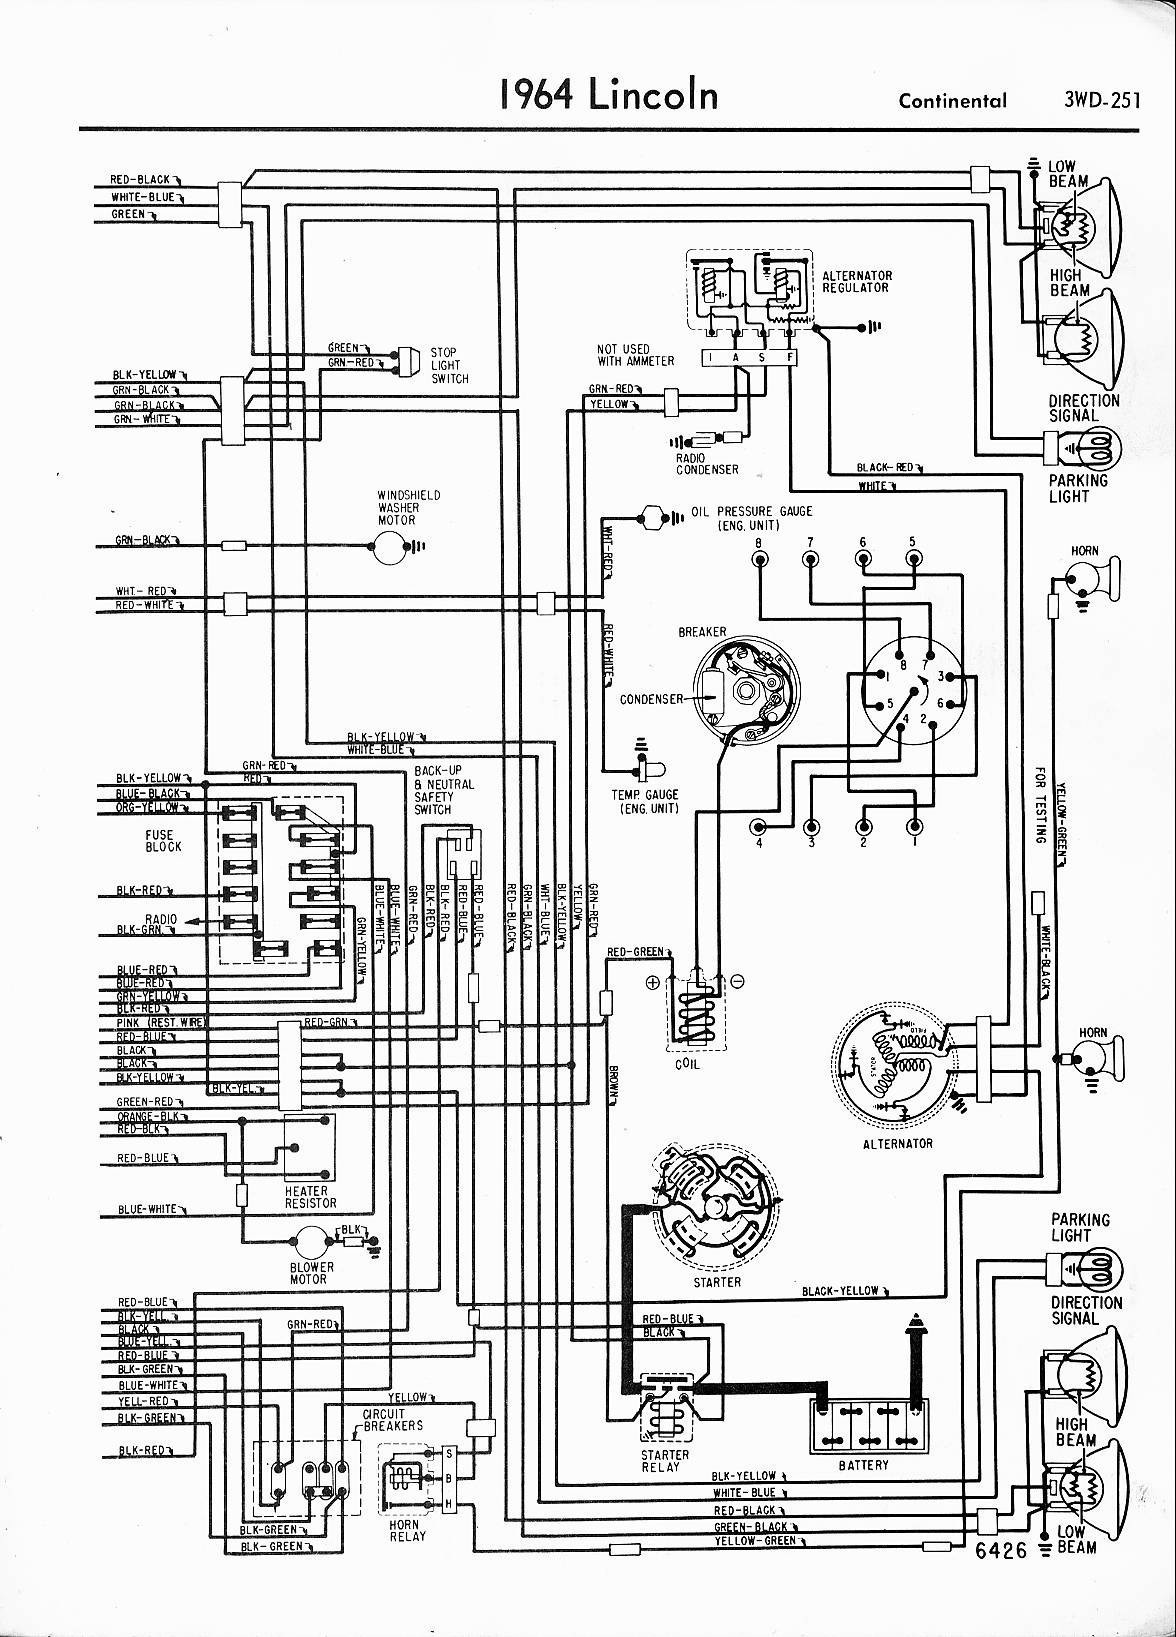 2001 Lincoln Navigator Engine Diagram Lincoln Continental Engine Diagram Worksheet and Wiring Diagram • Of 2001 Lincoln Navigator Engine Diagram